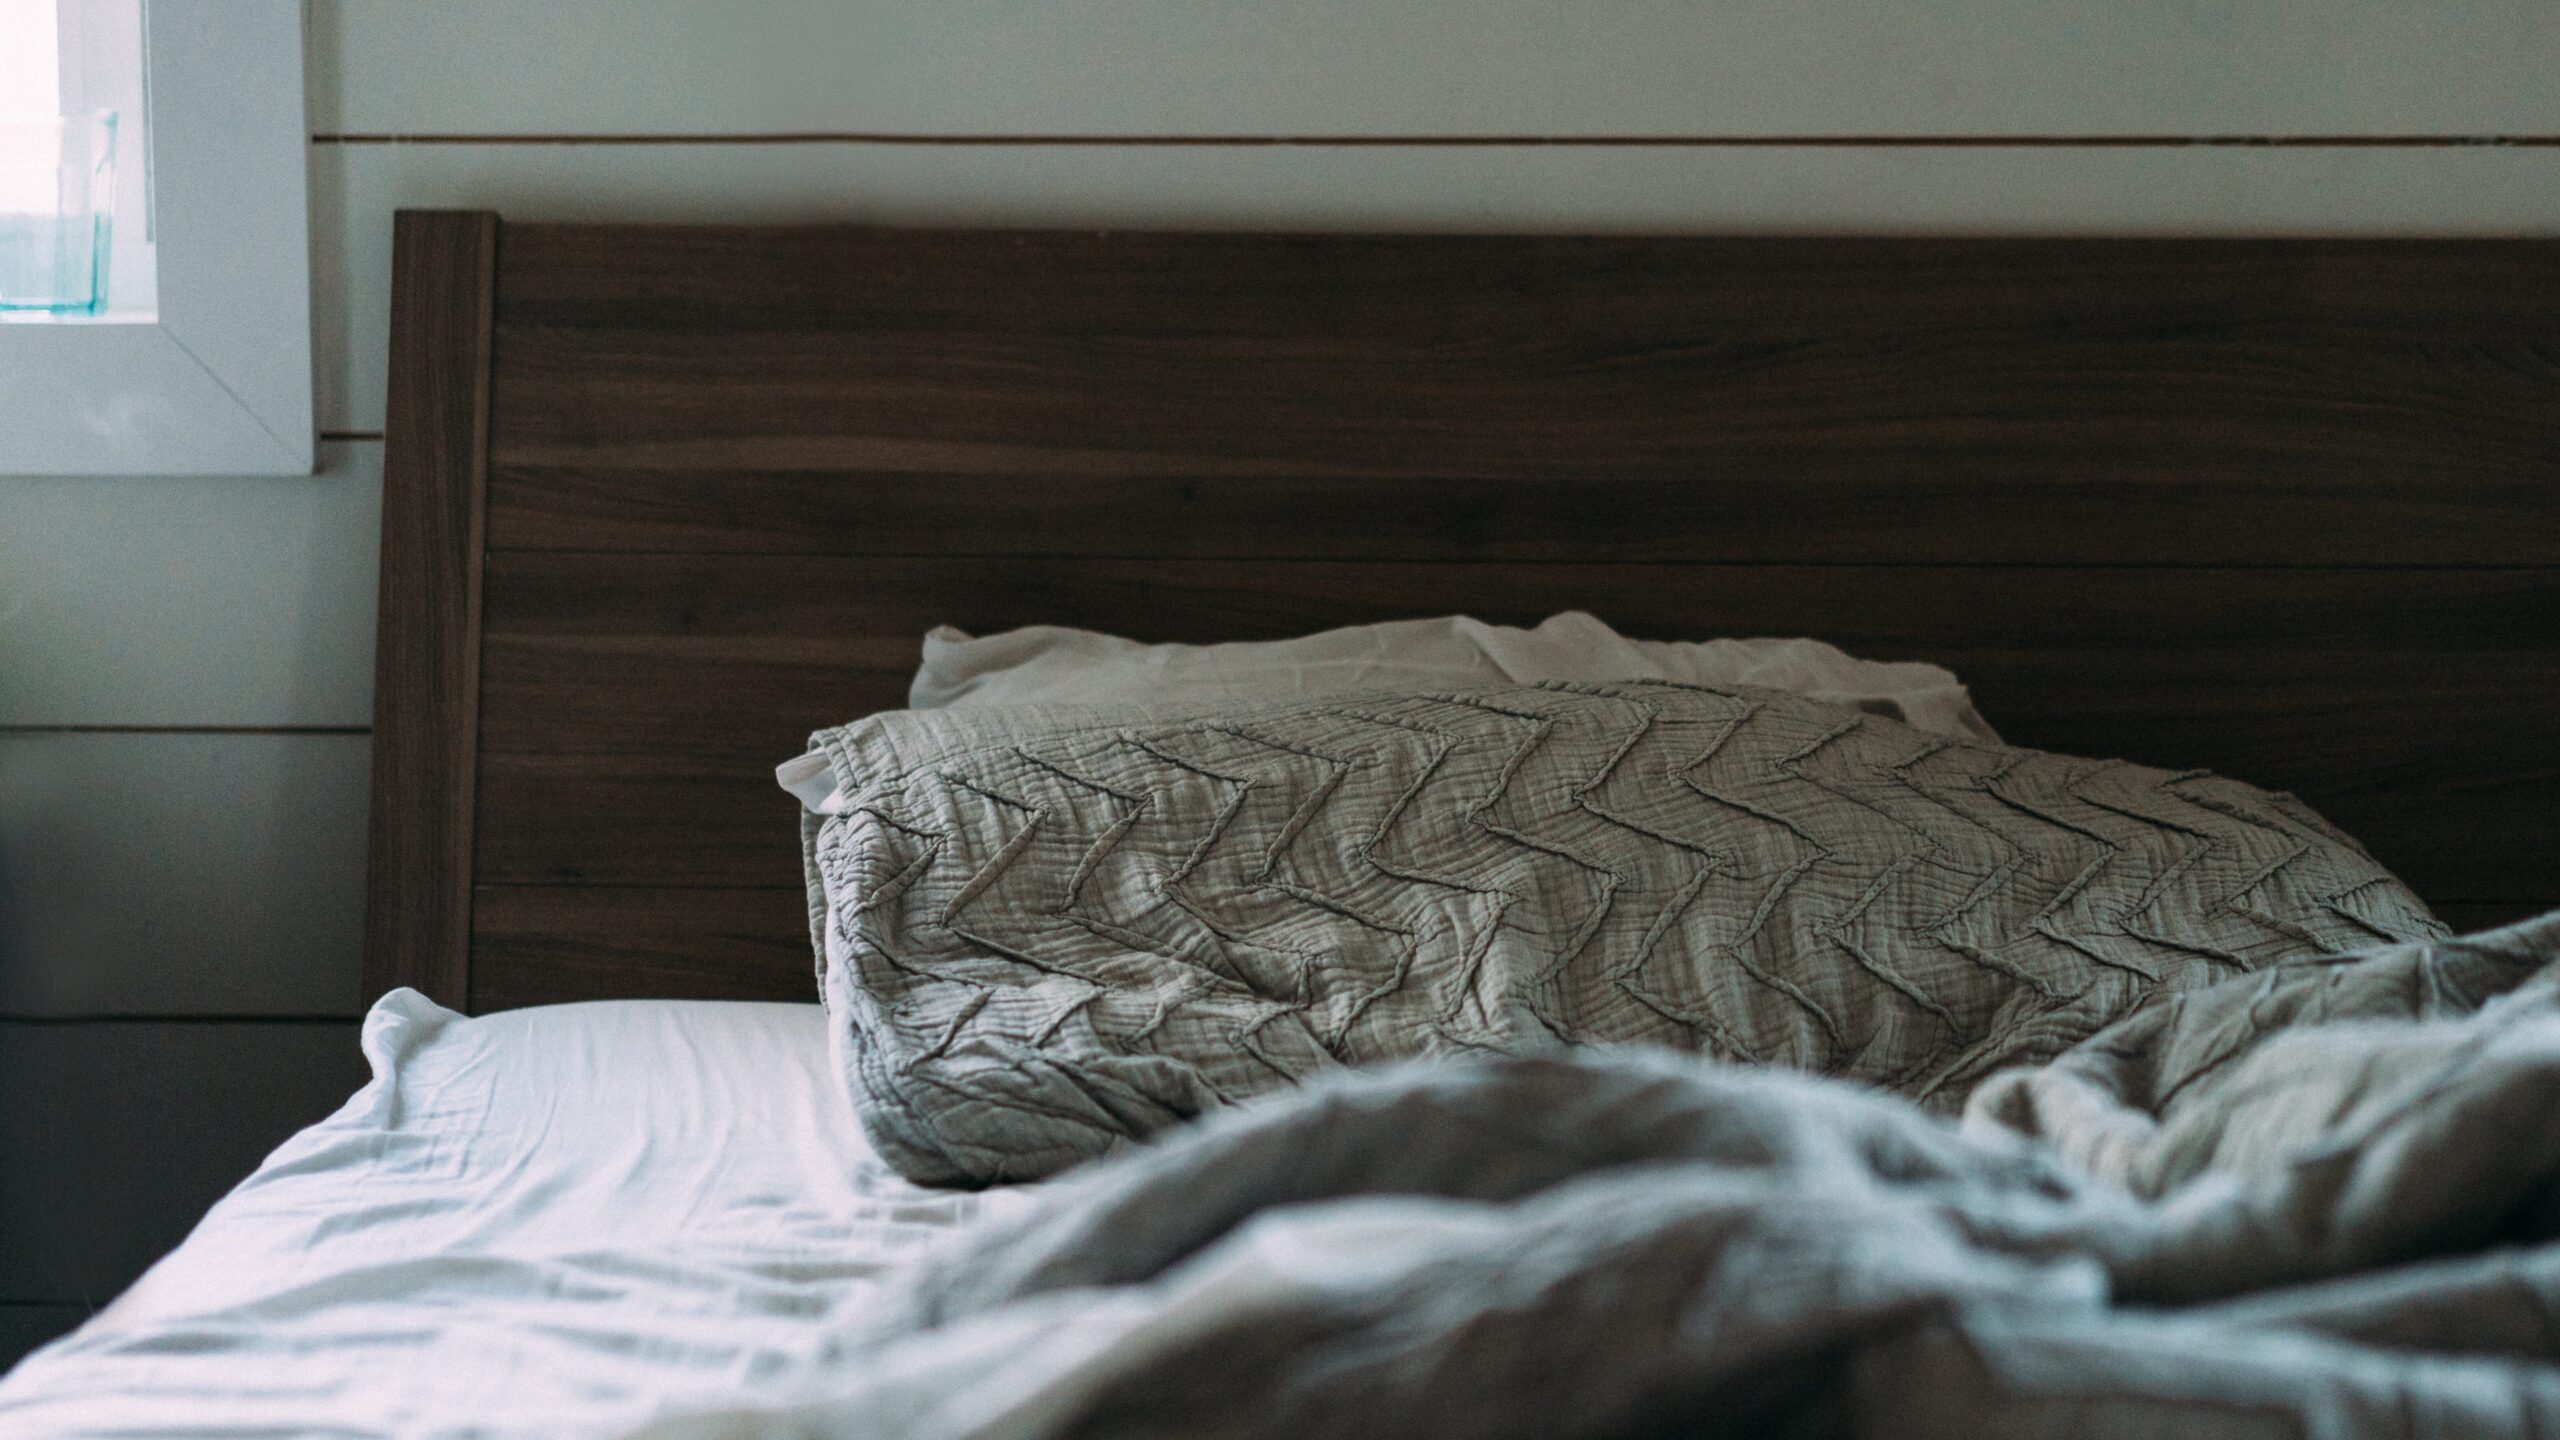 Headboard of a brown wooden bed with rumpled sheets and pillows